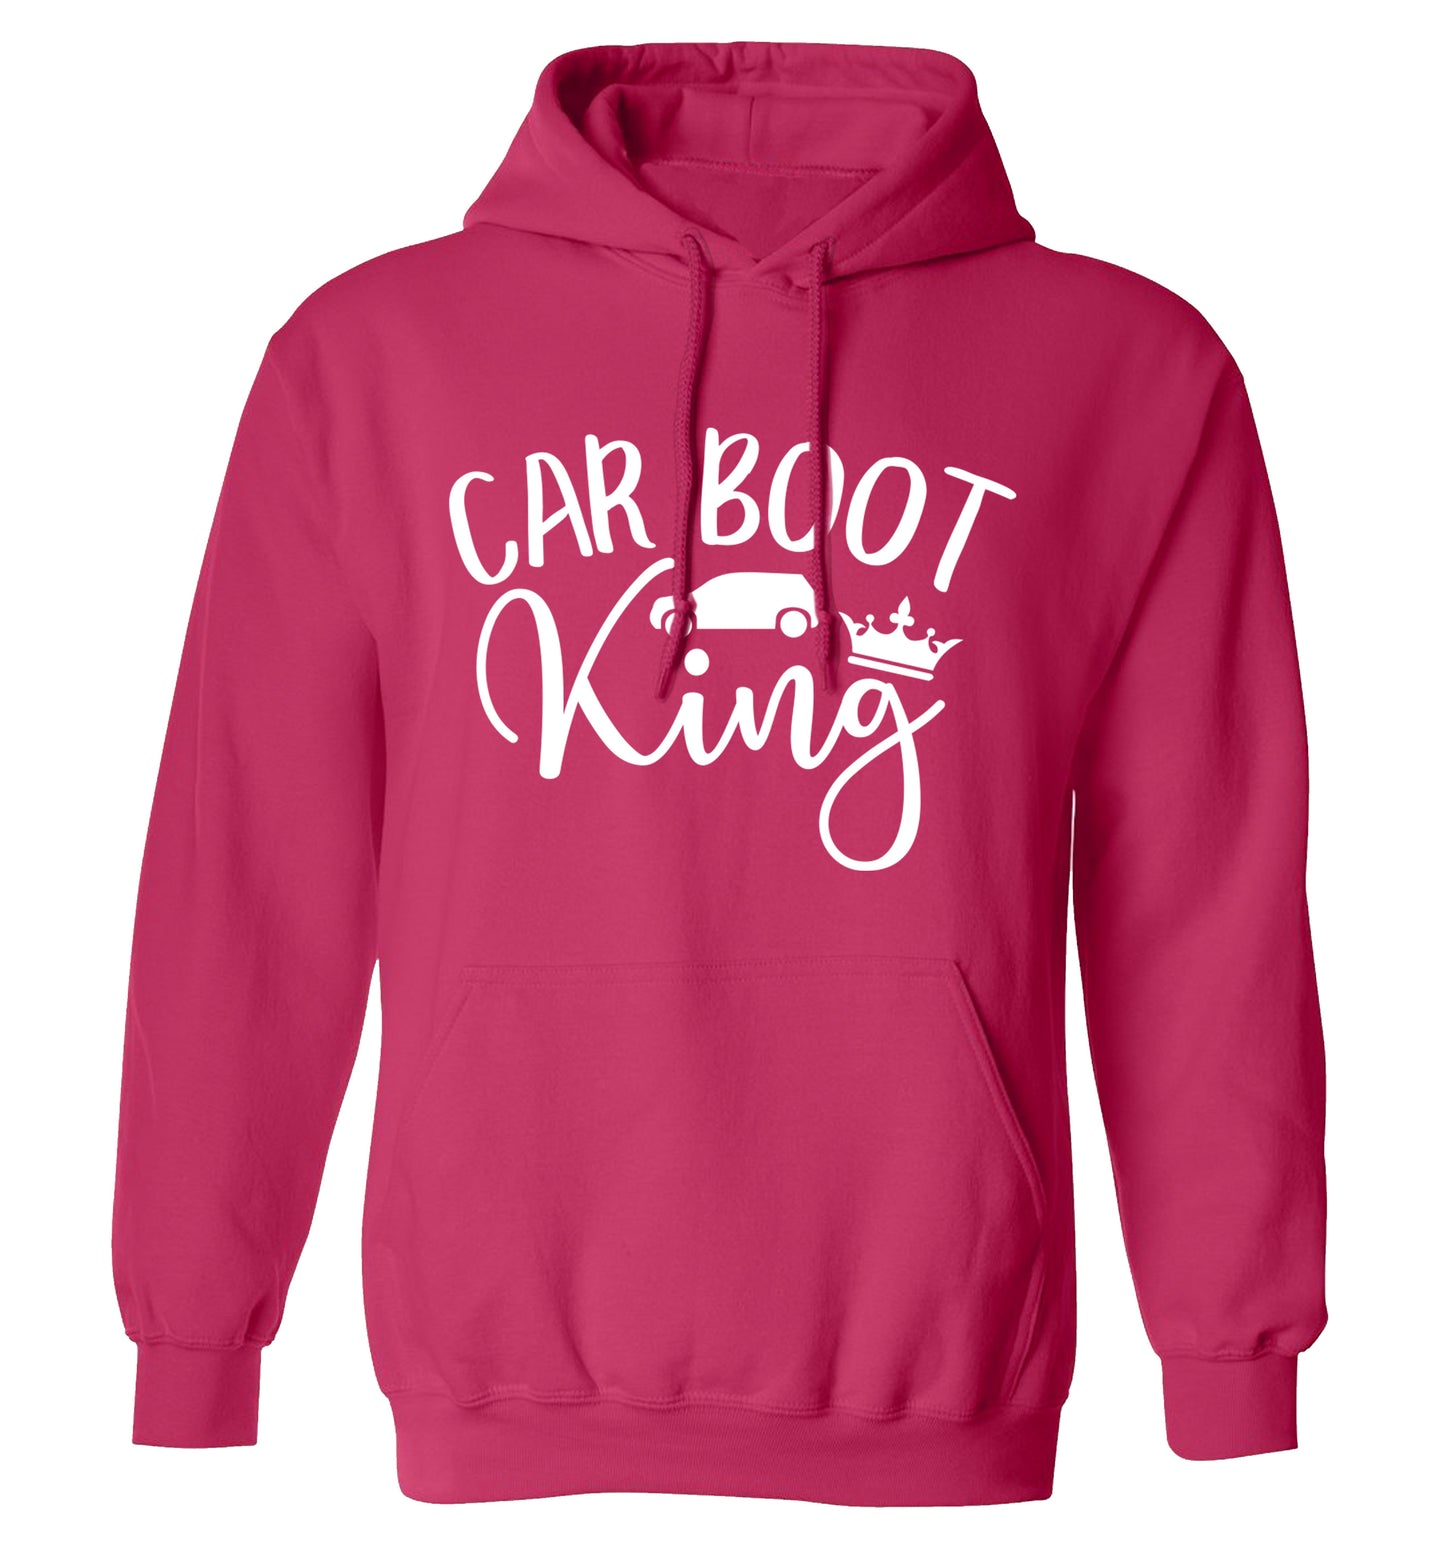 Carboot King adults unisex pink hoodie 2XL